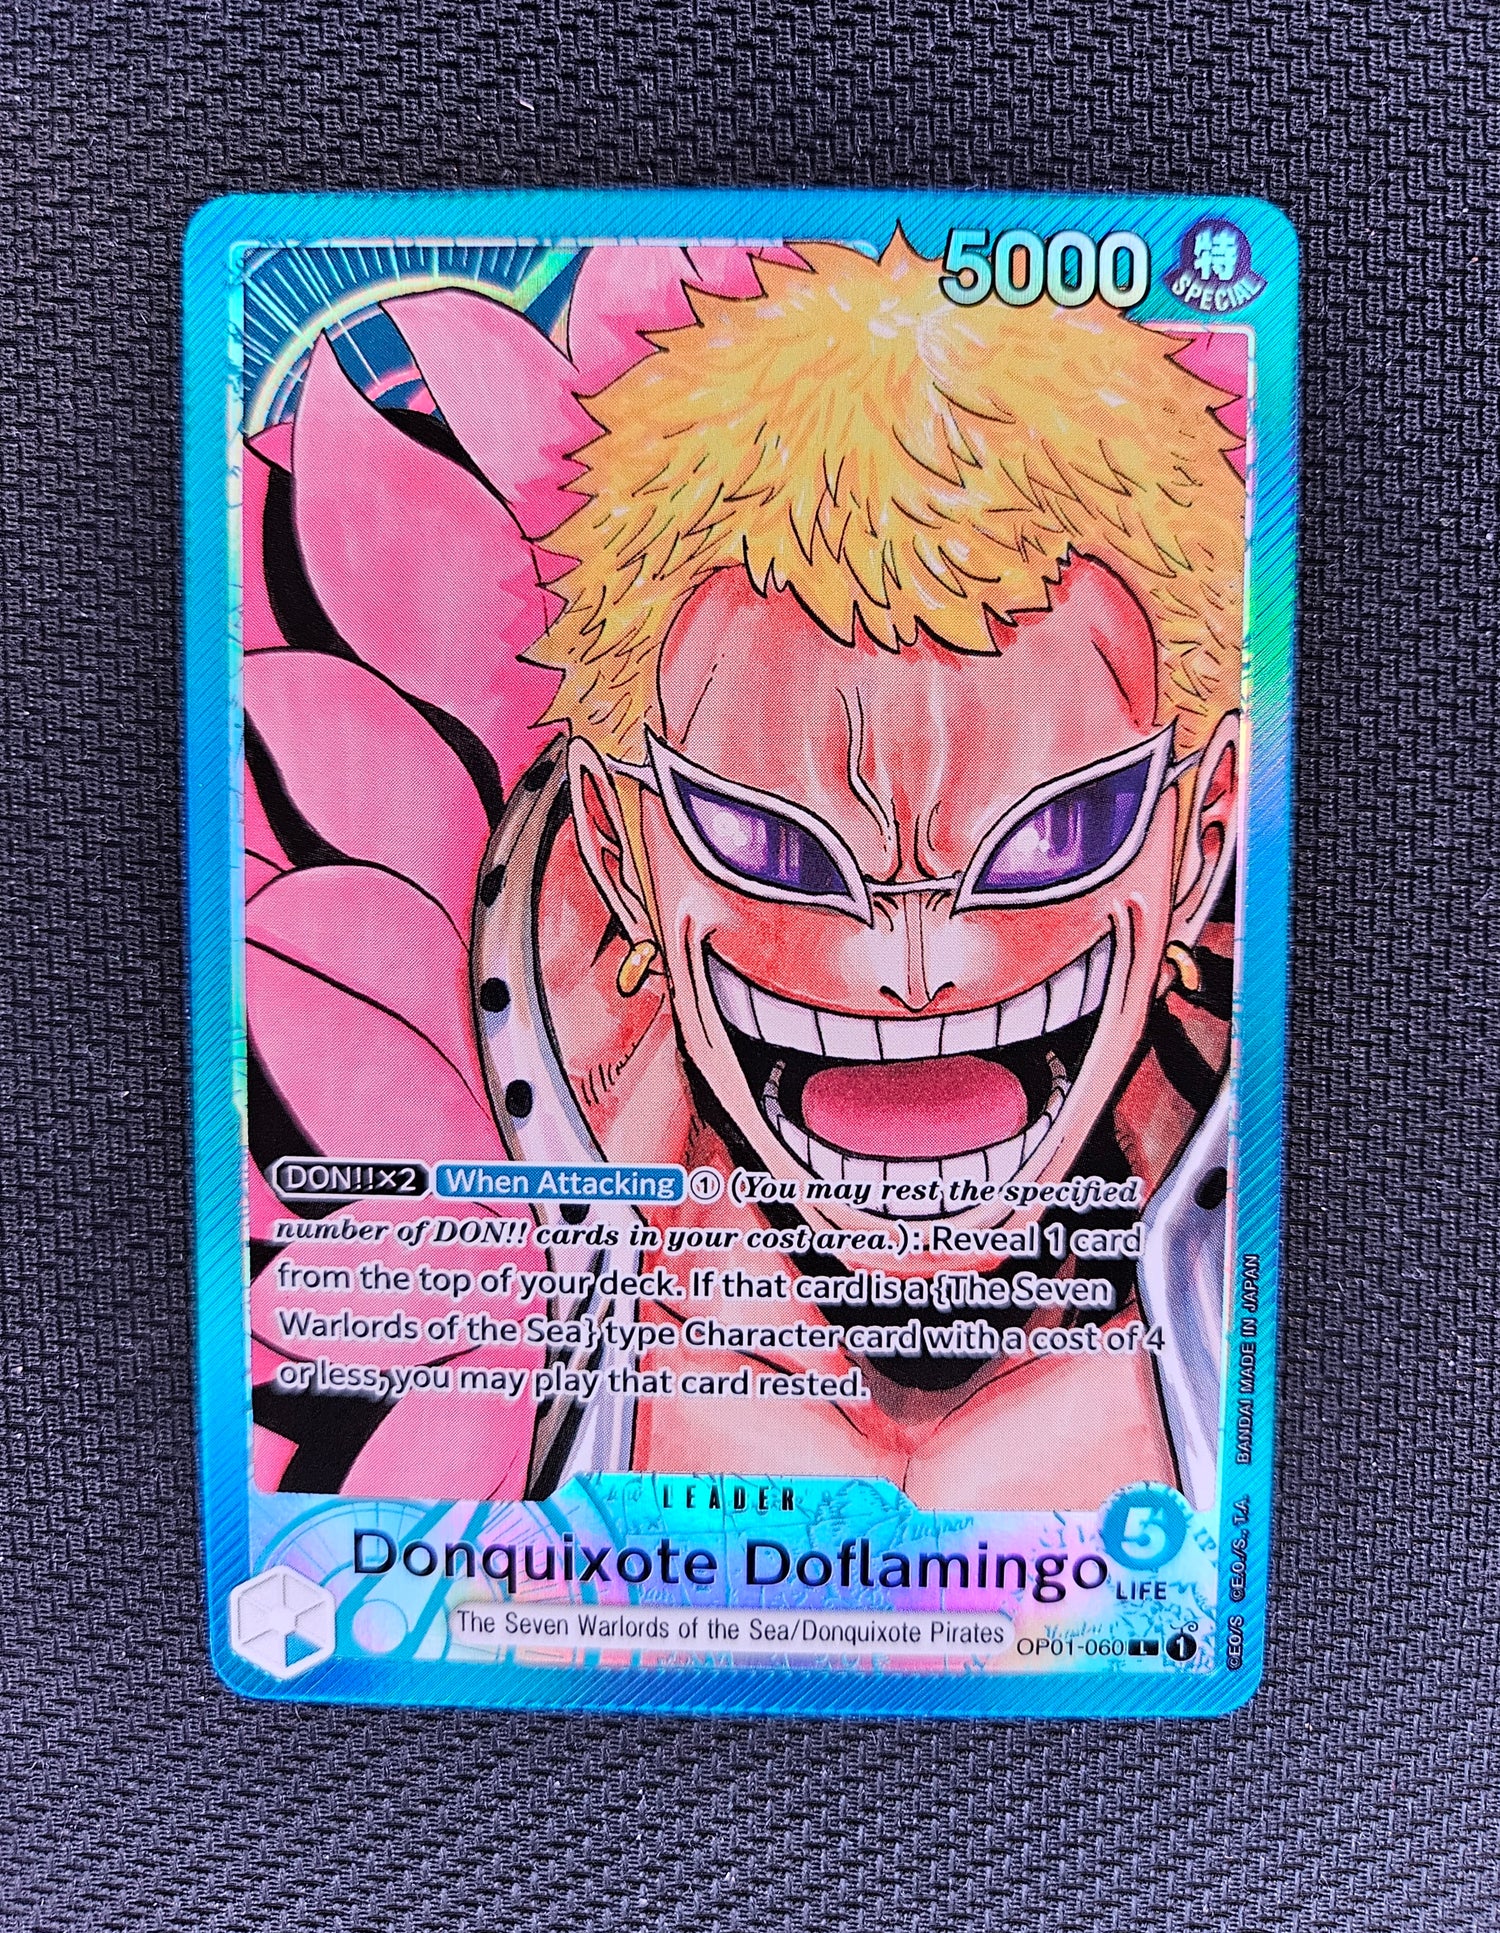 ONE PIECE CARD carte GAME op01-060 L- NEAR MINT-MADE IN JAPAN EUR